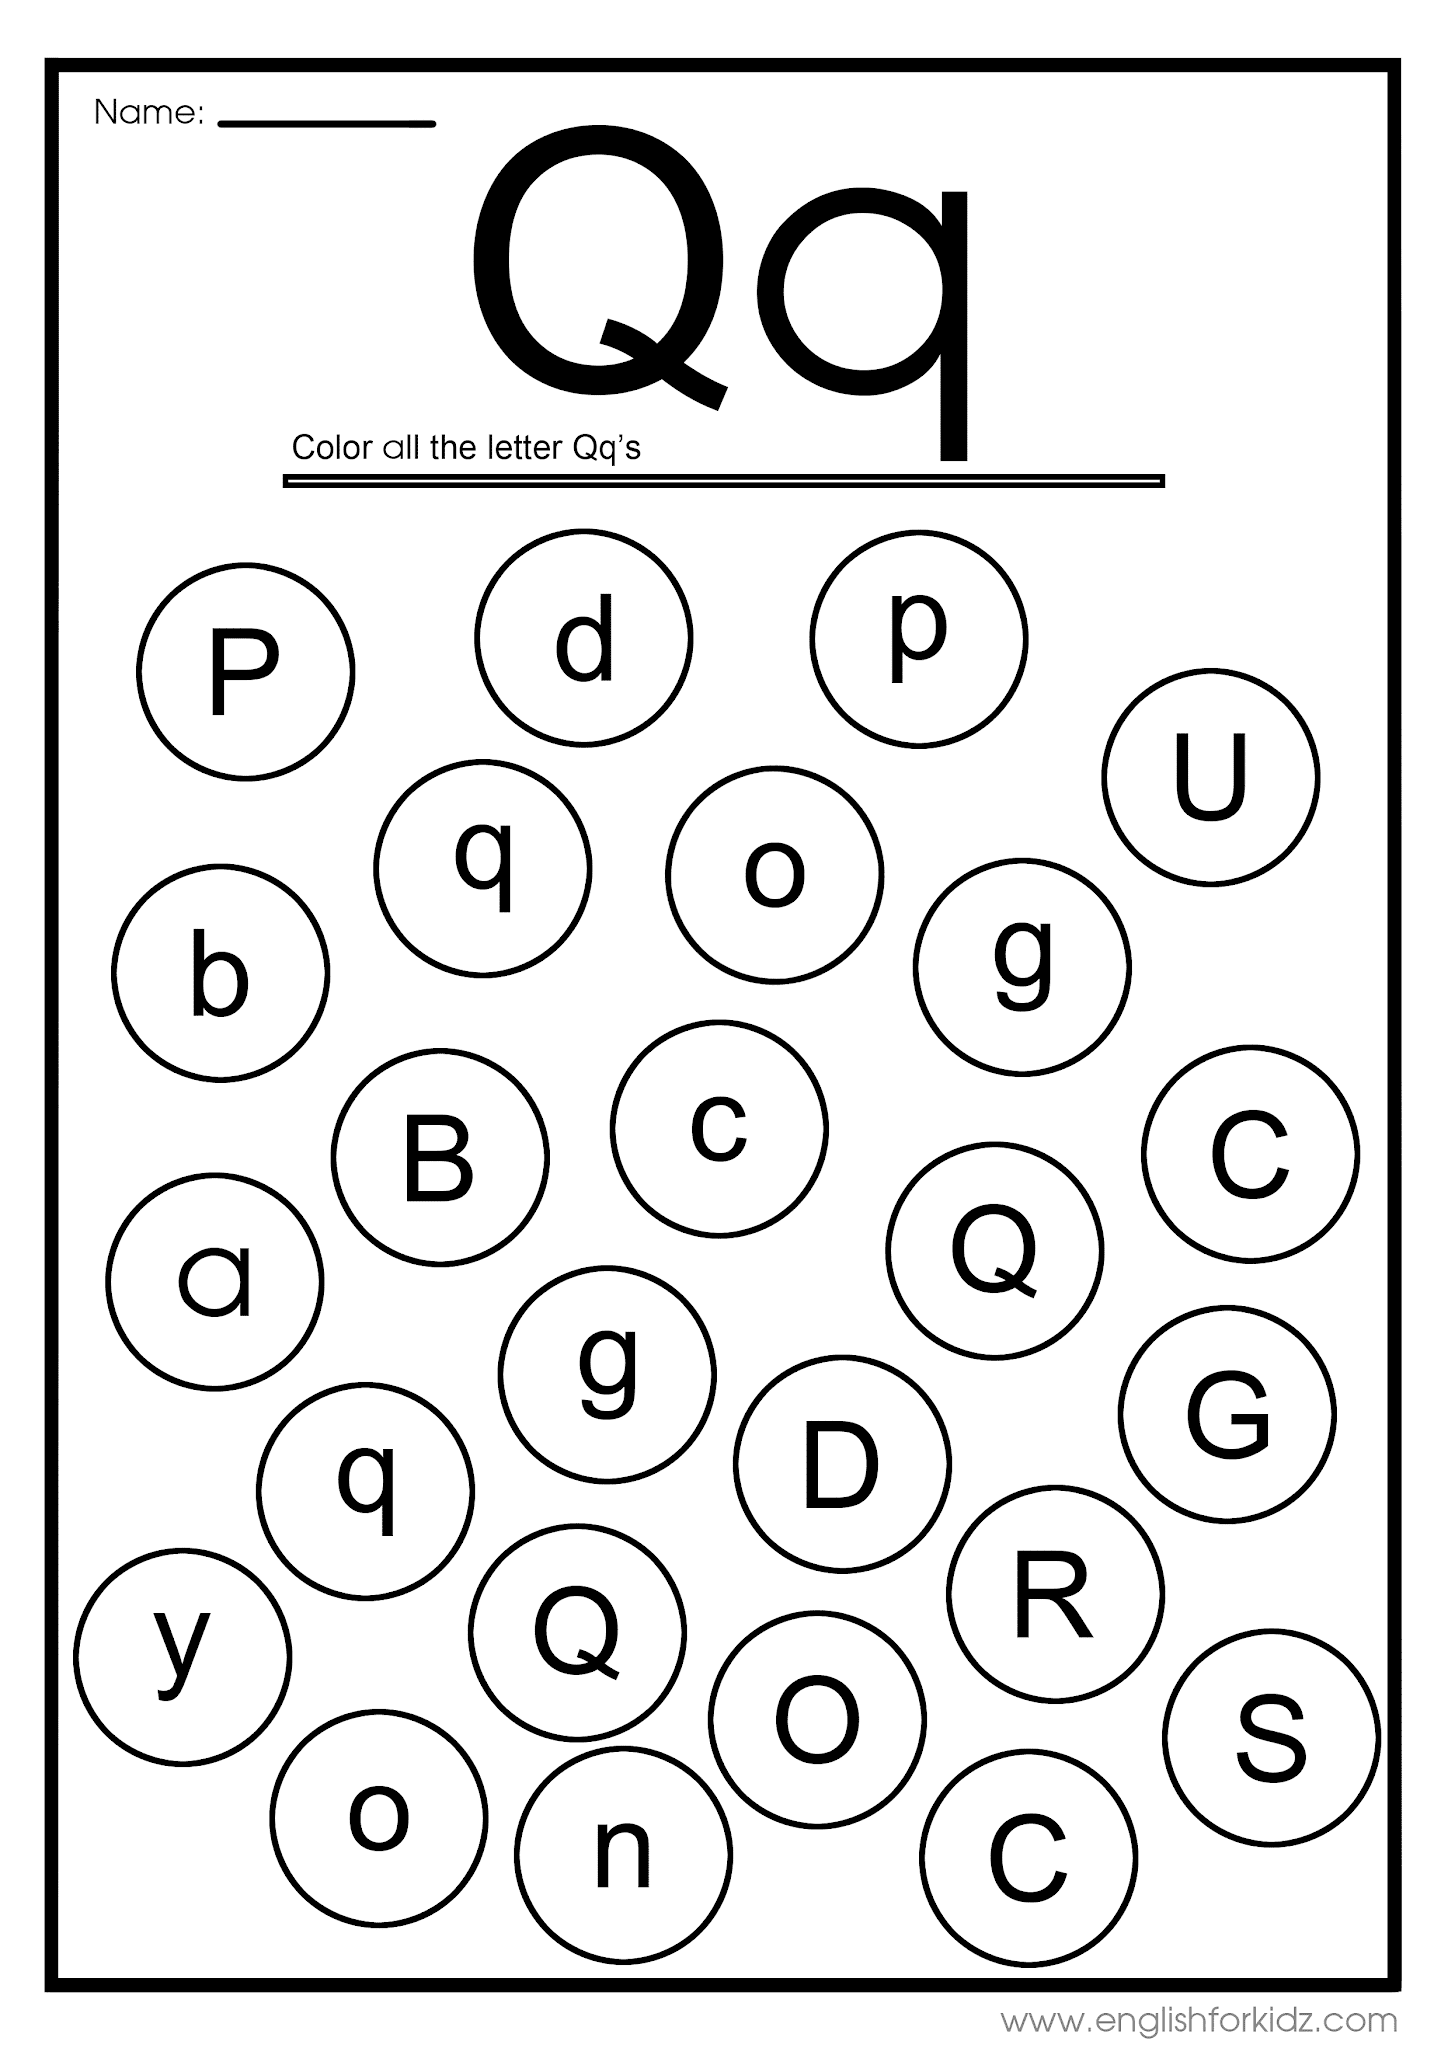 Letter Q Worksheets, Flash Cards, Coloring Pages